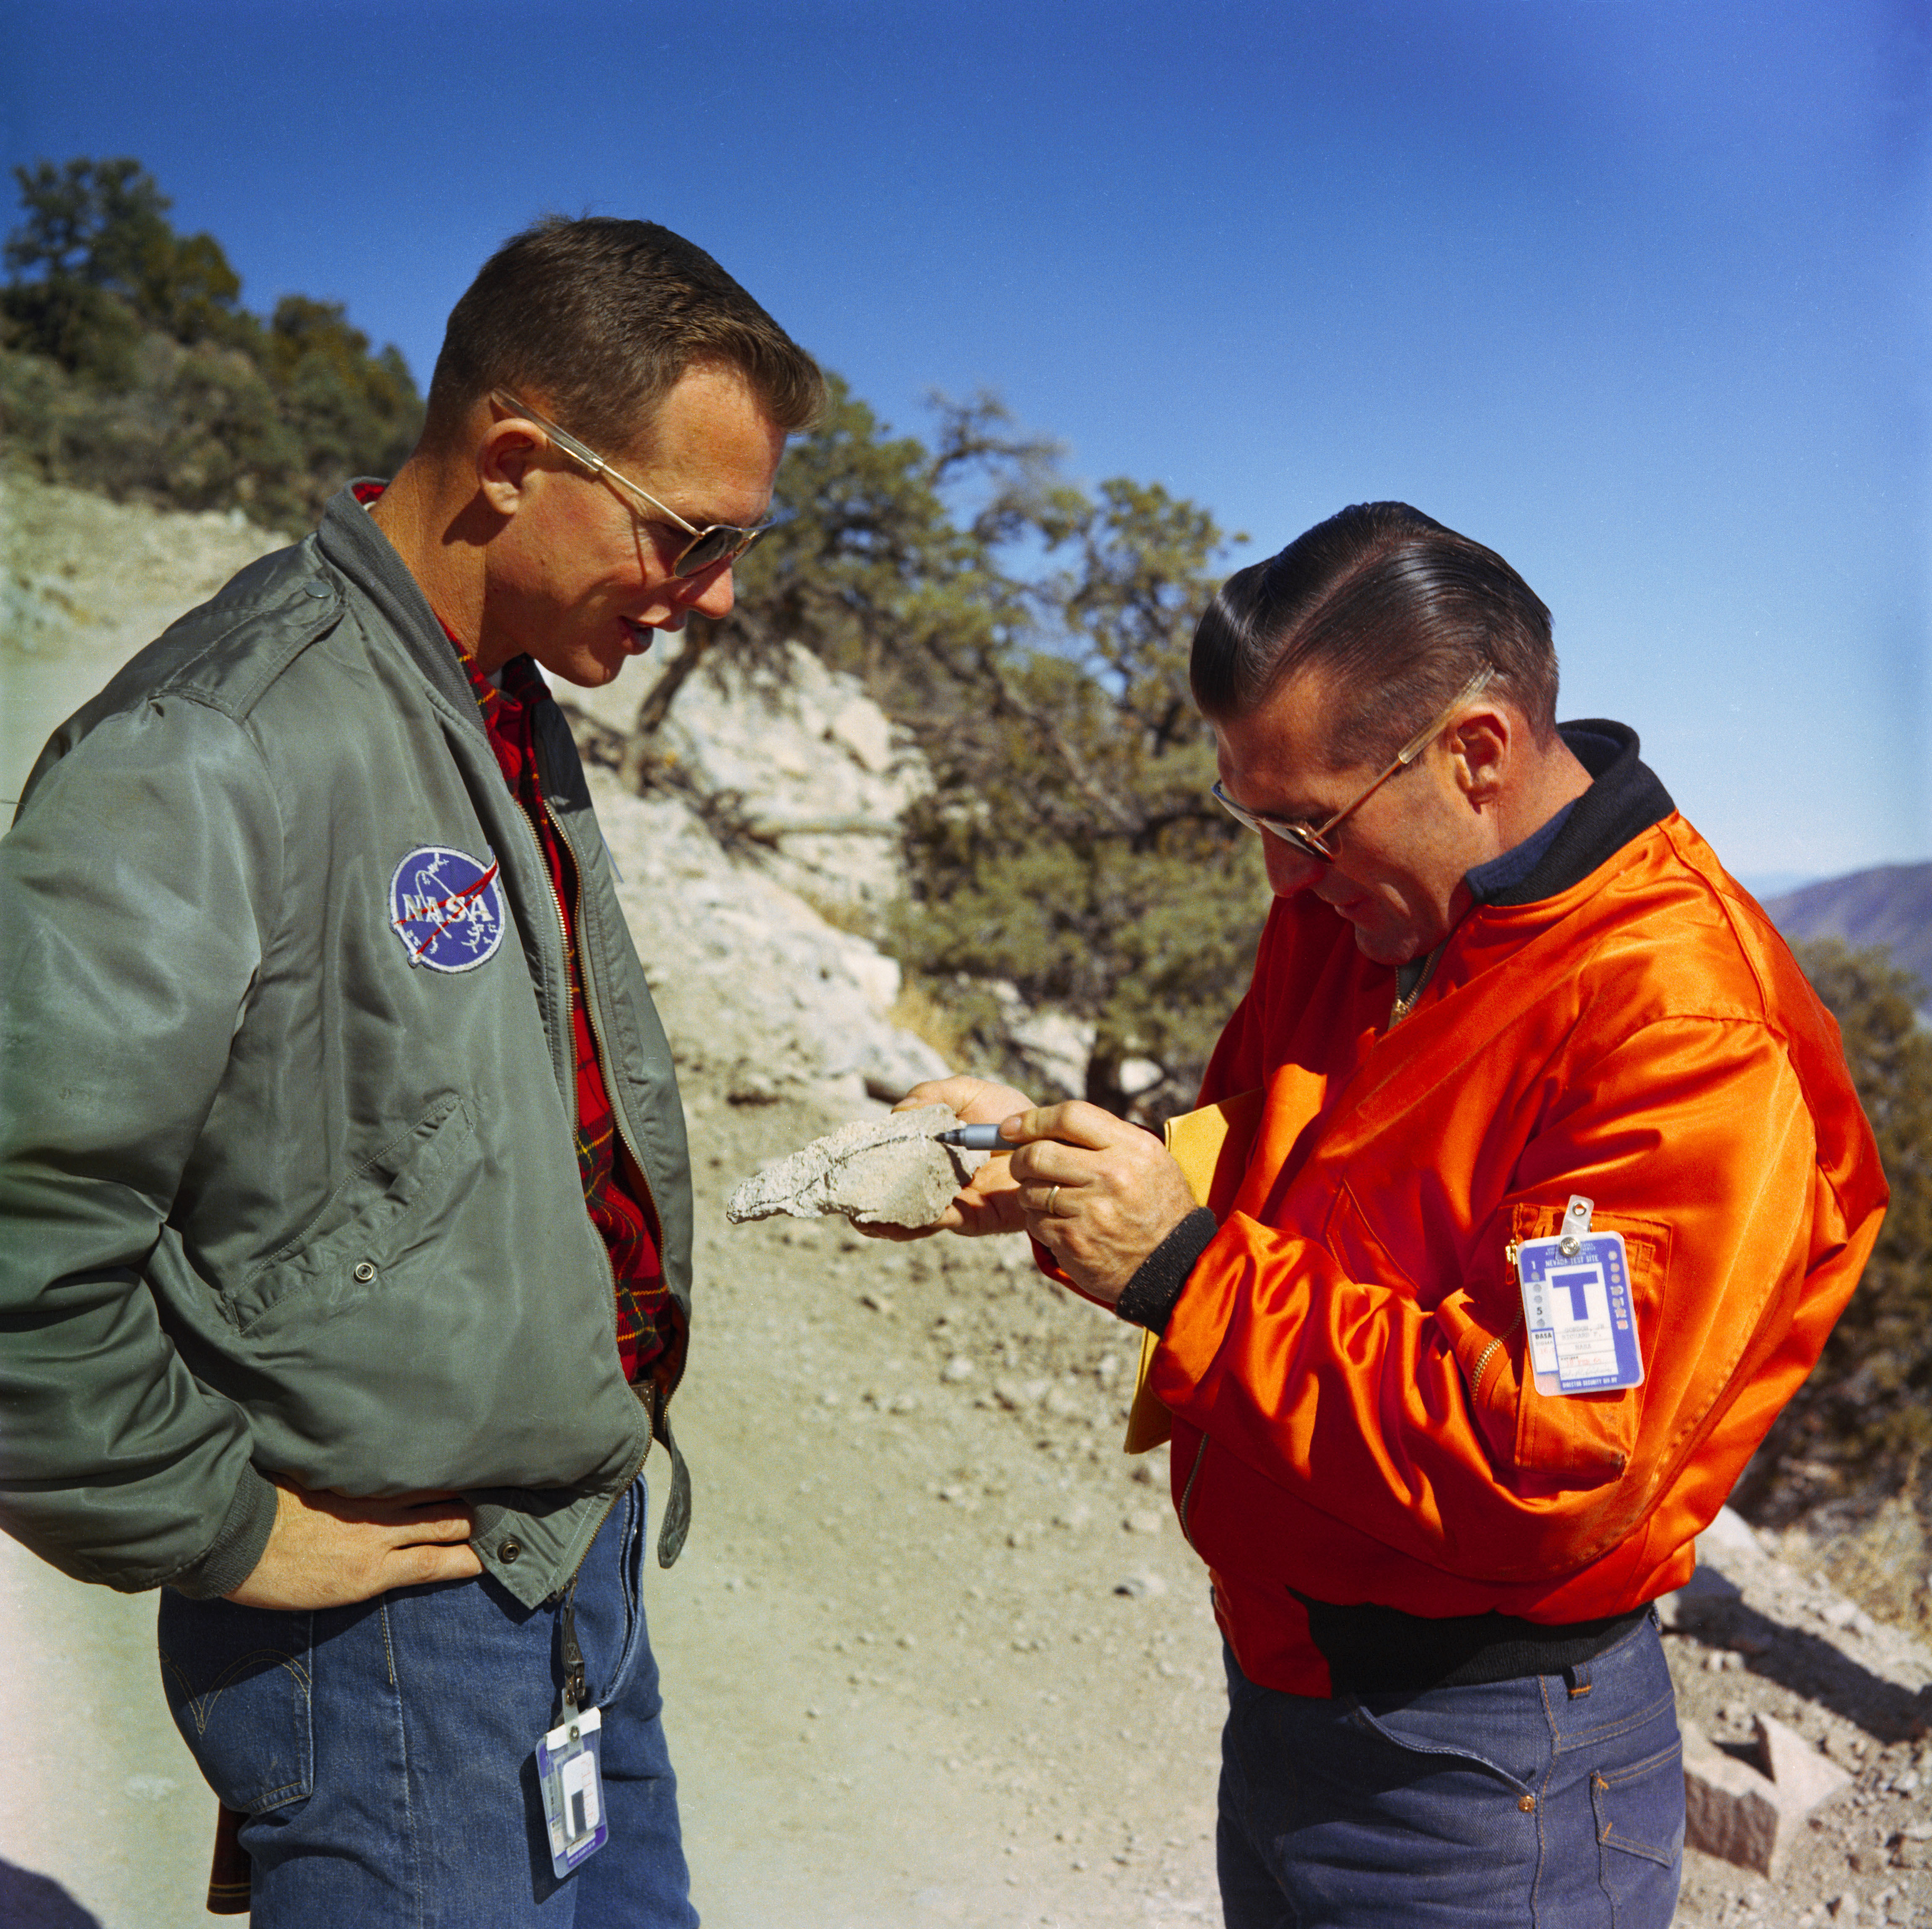 David R. Scott and Richard F. Gordon examine a rock sample during a geology field trip to the Nevada Test Site at Yucca Flats